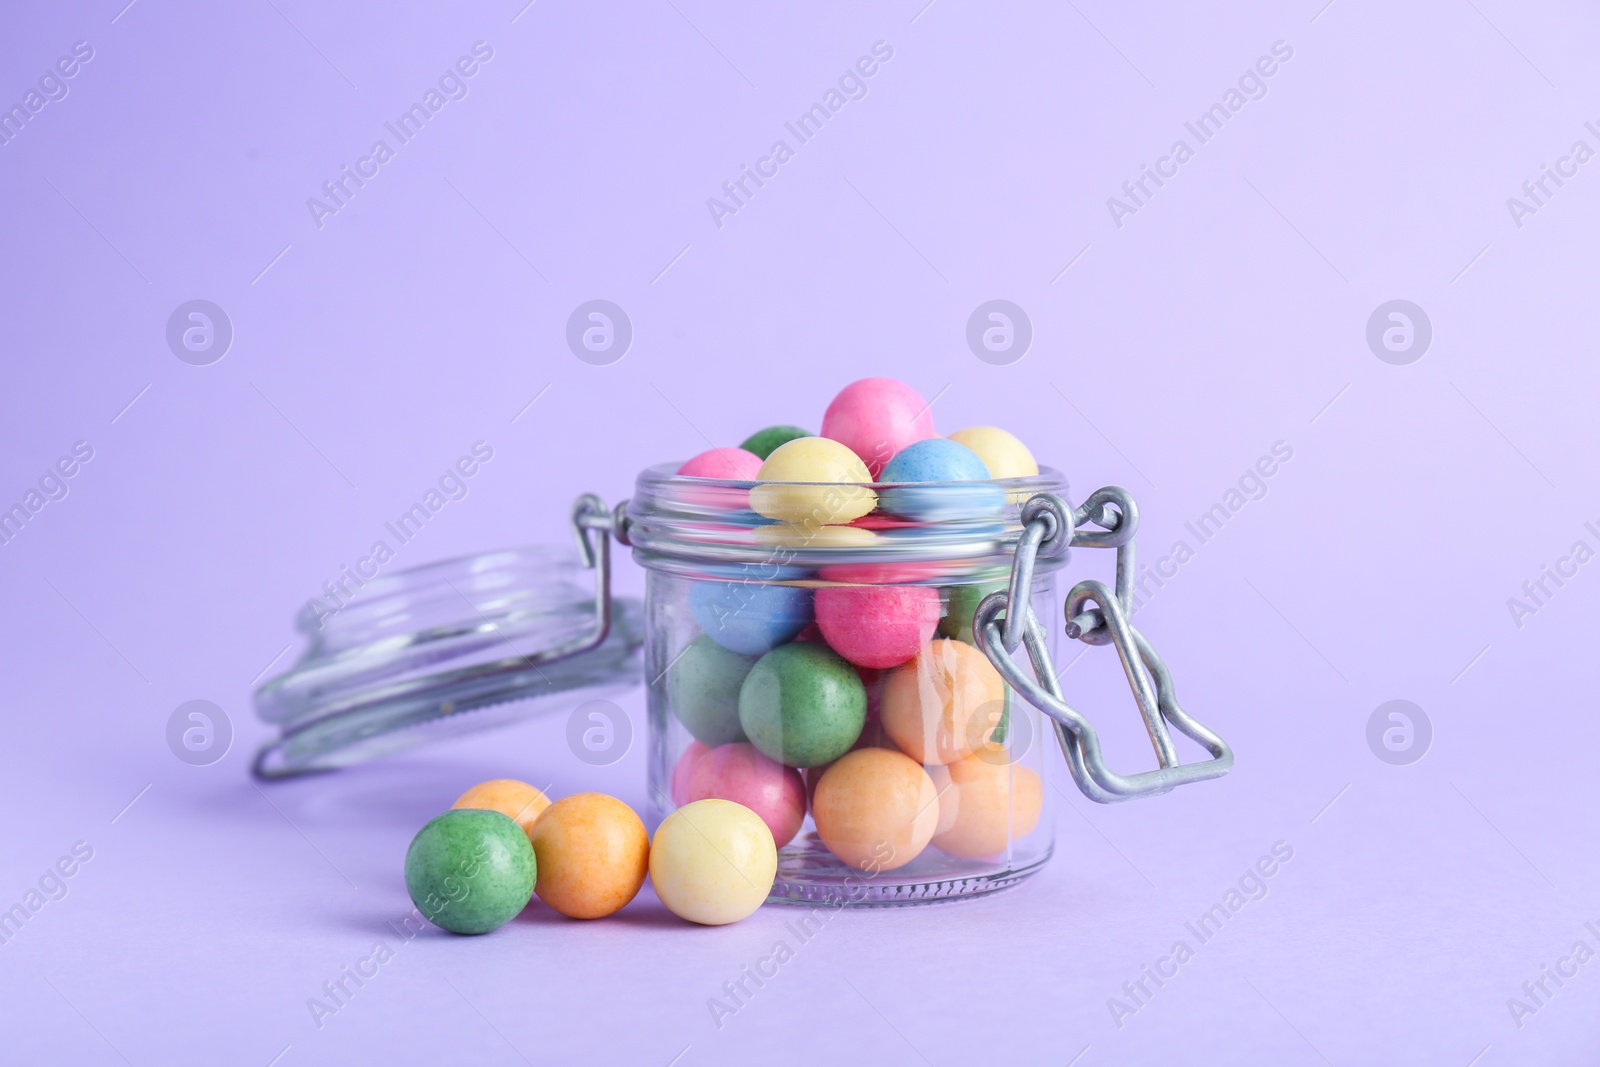 Photo of Jar with many bright gumballs on lilac background